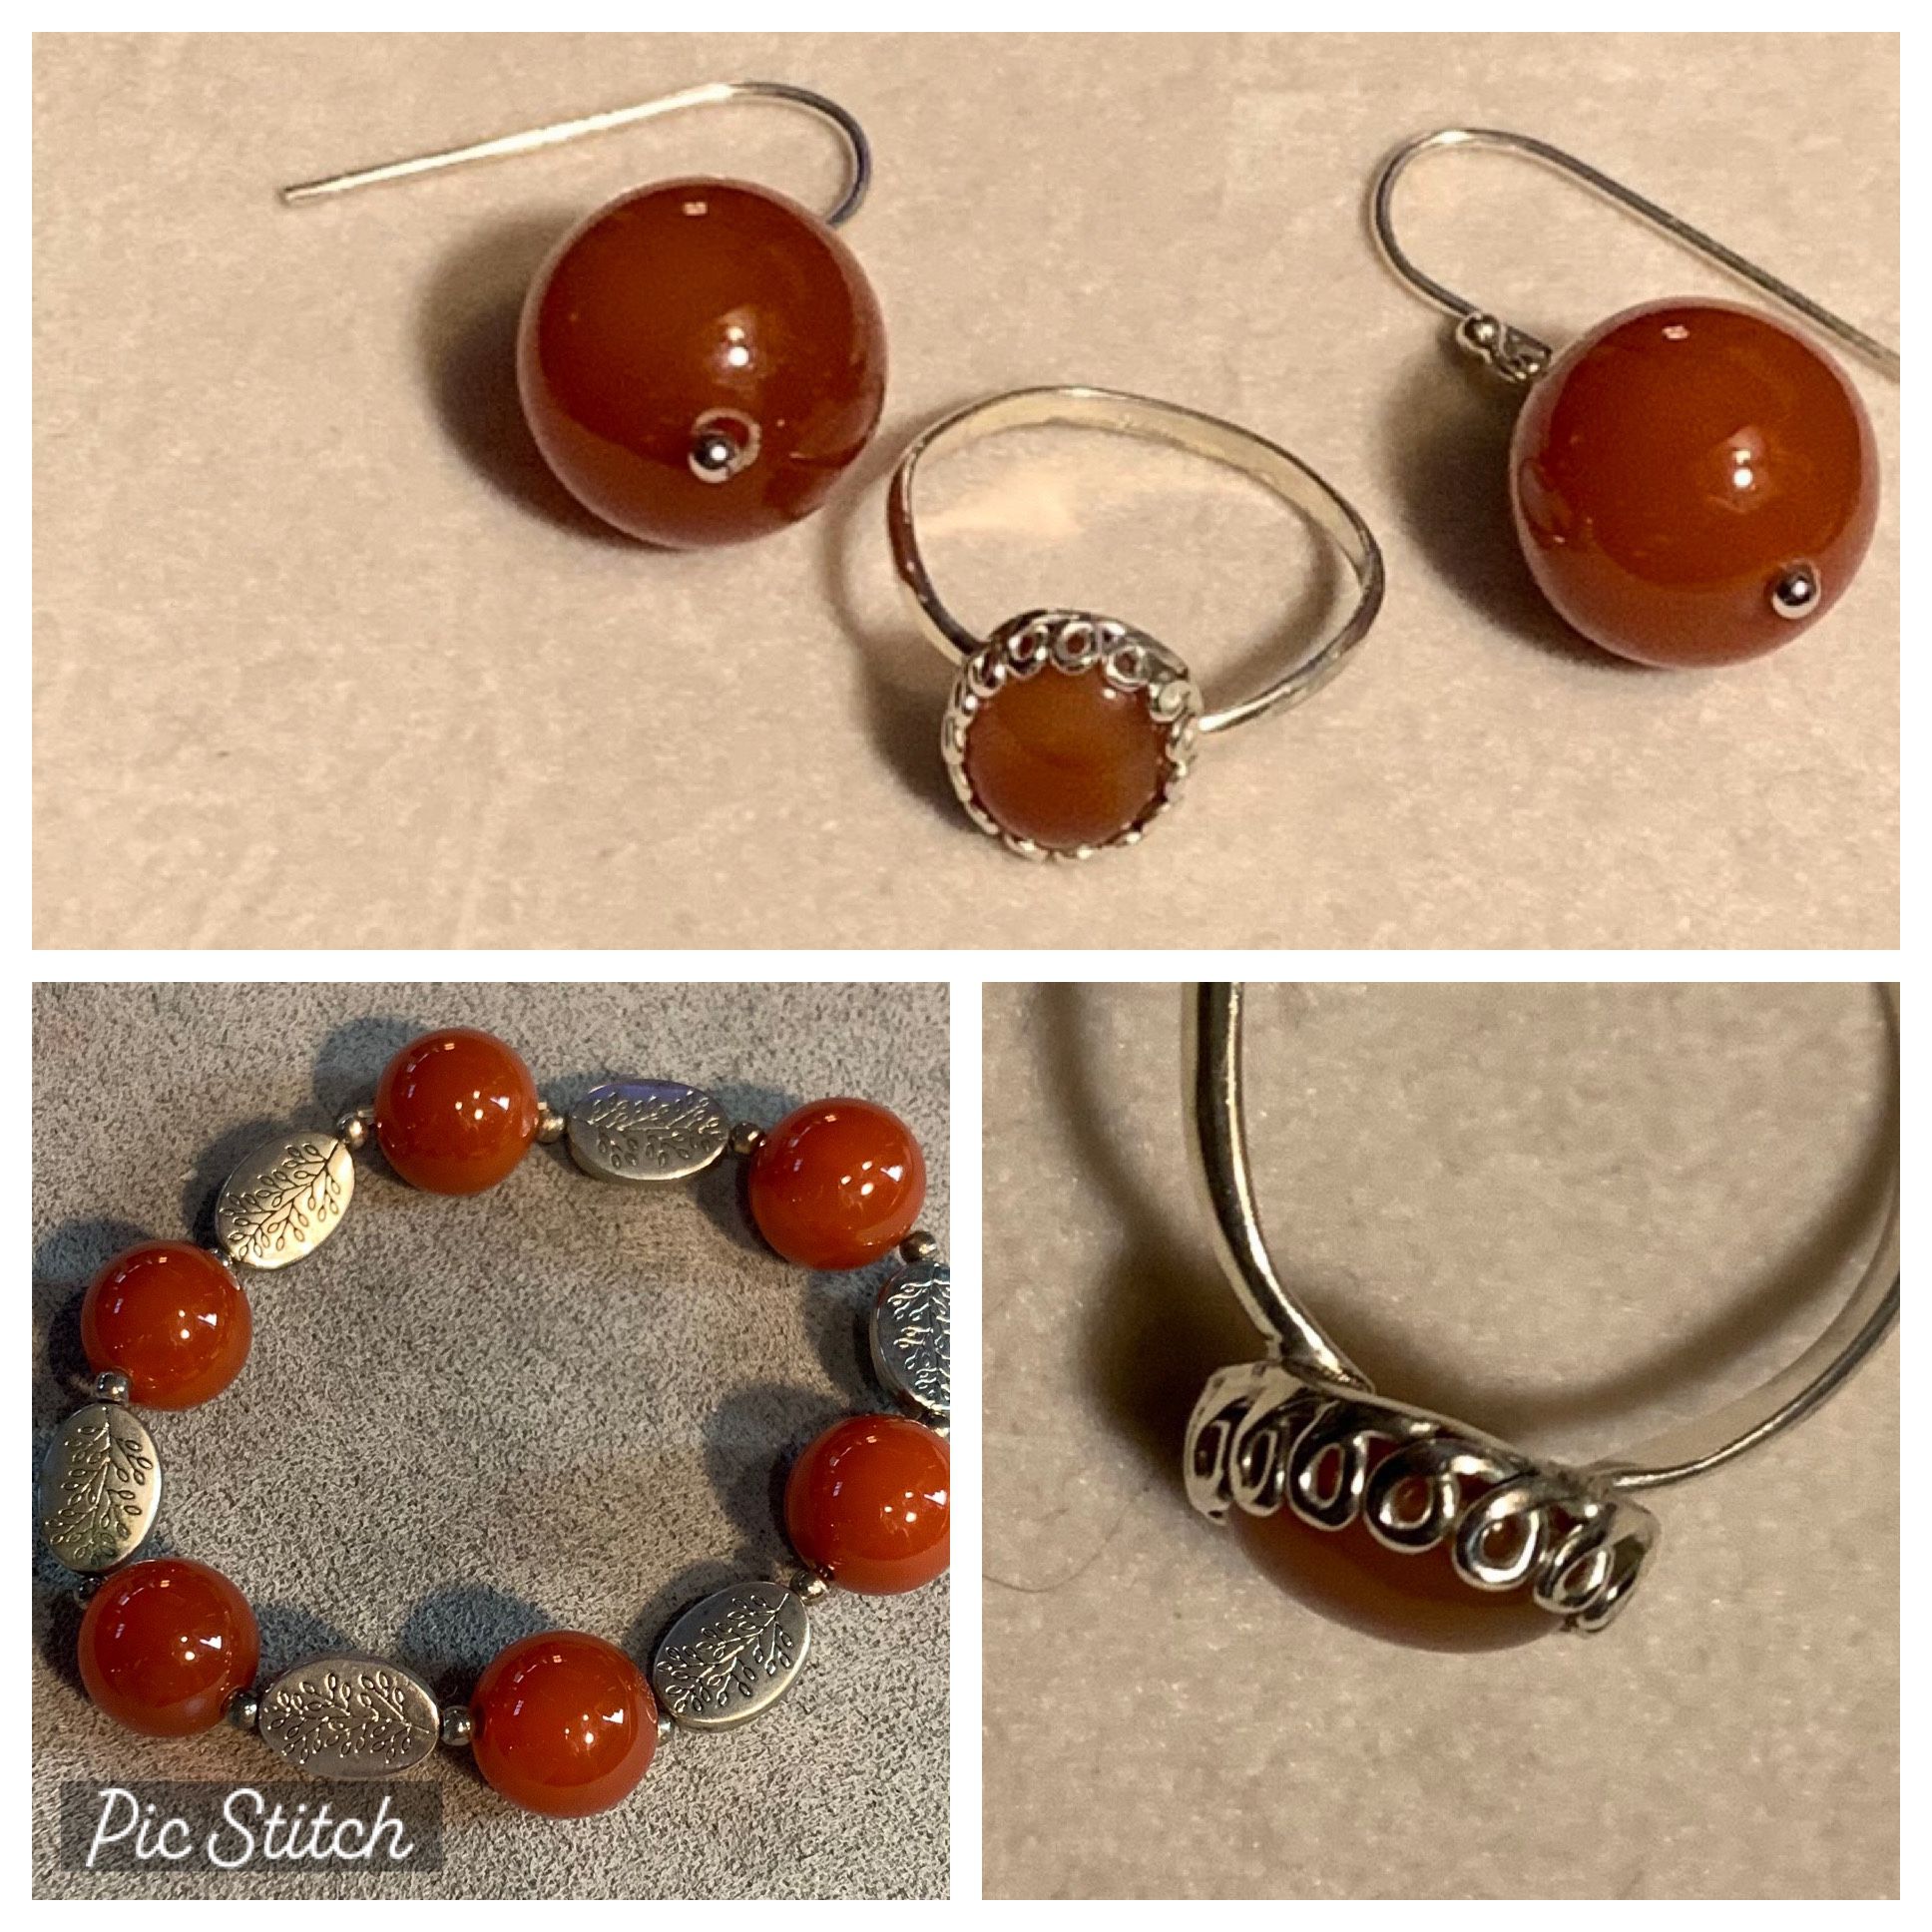 Genuine Carnelian Natural Stones. Silver. Ring Is Size 8. Nice Set.  Includes Stretch Bracelet 